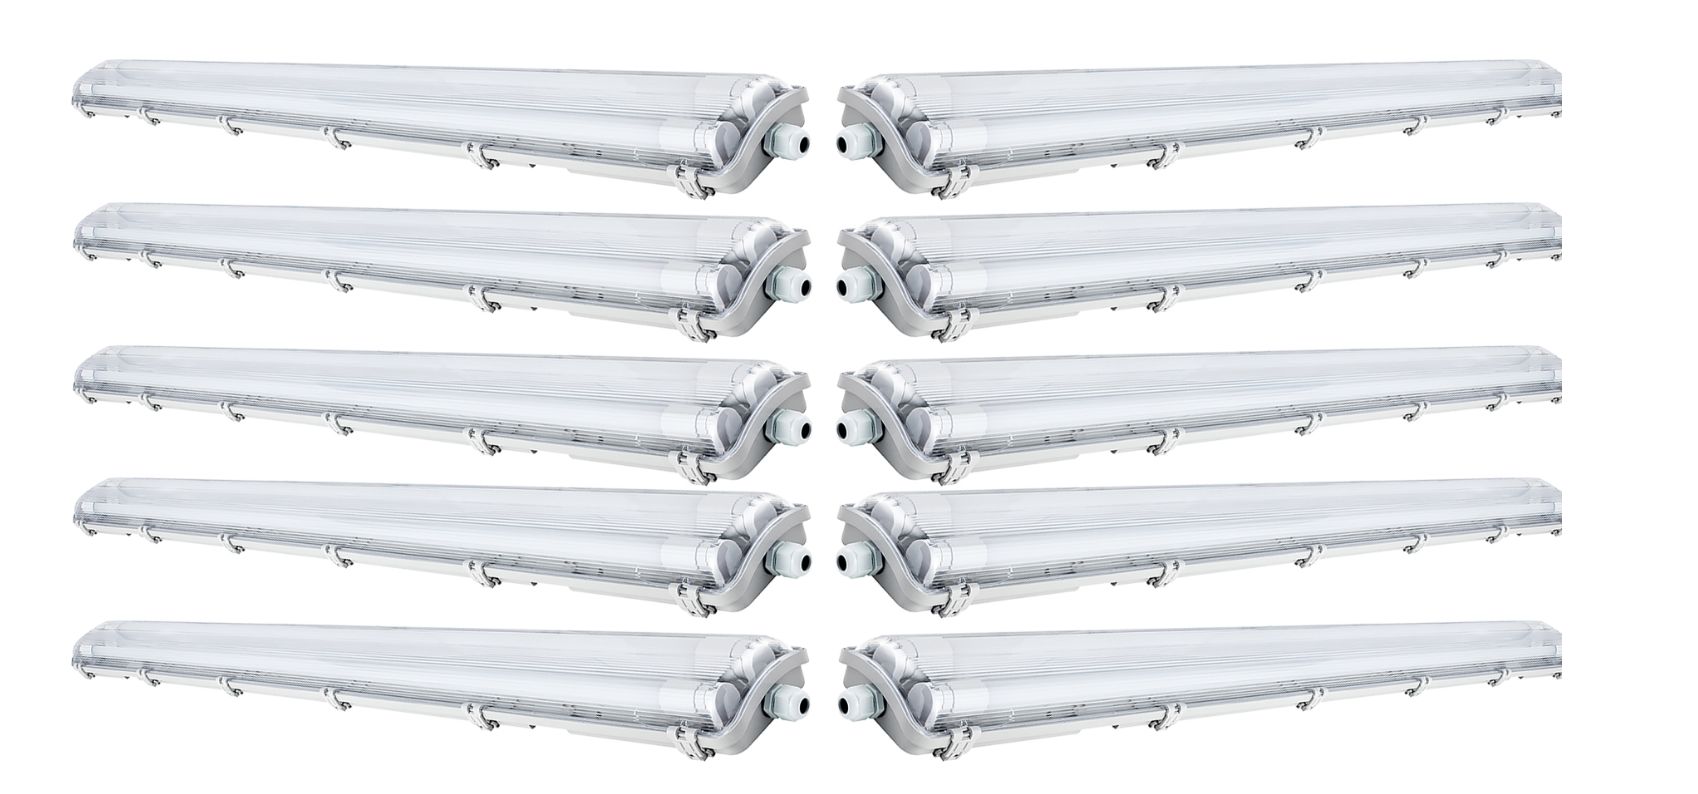 10x G13 LED Feuchtraumleuchte IP65, 2x T8 LED, Warmweiss 3000K